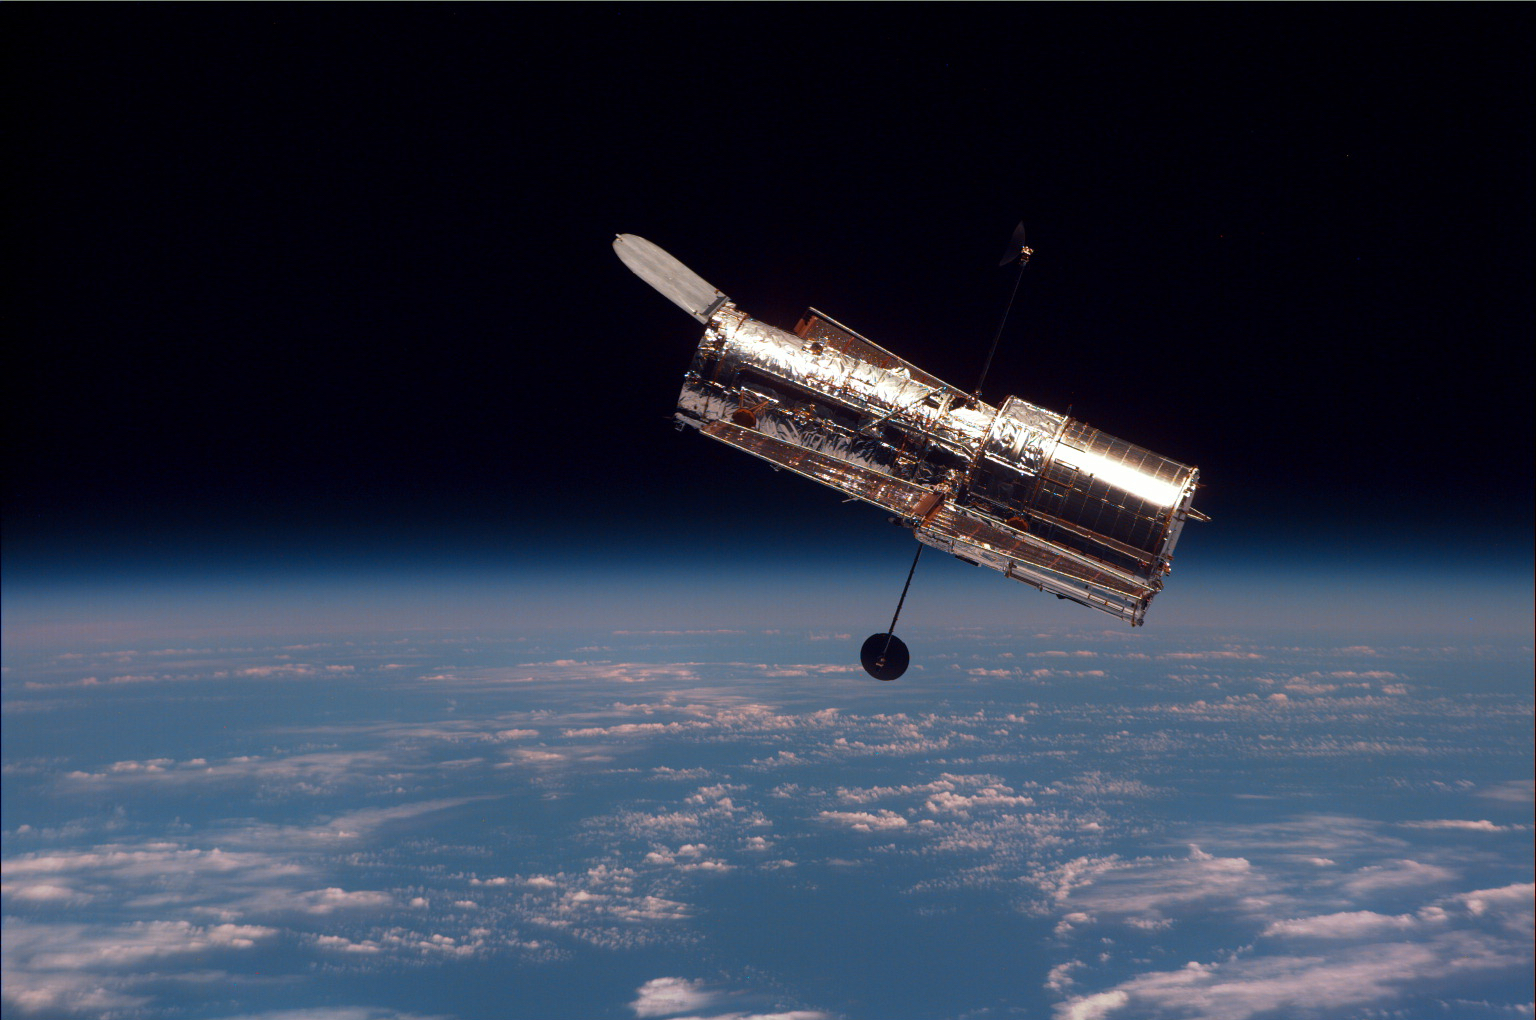 Hubble floats above a blue Earth streaked with clouds.